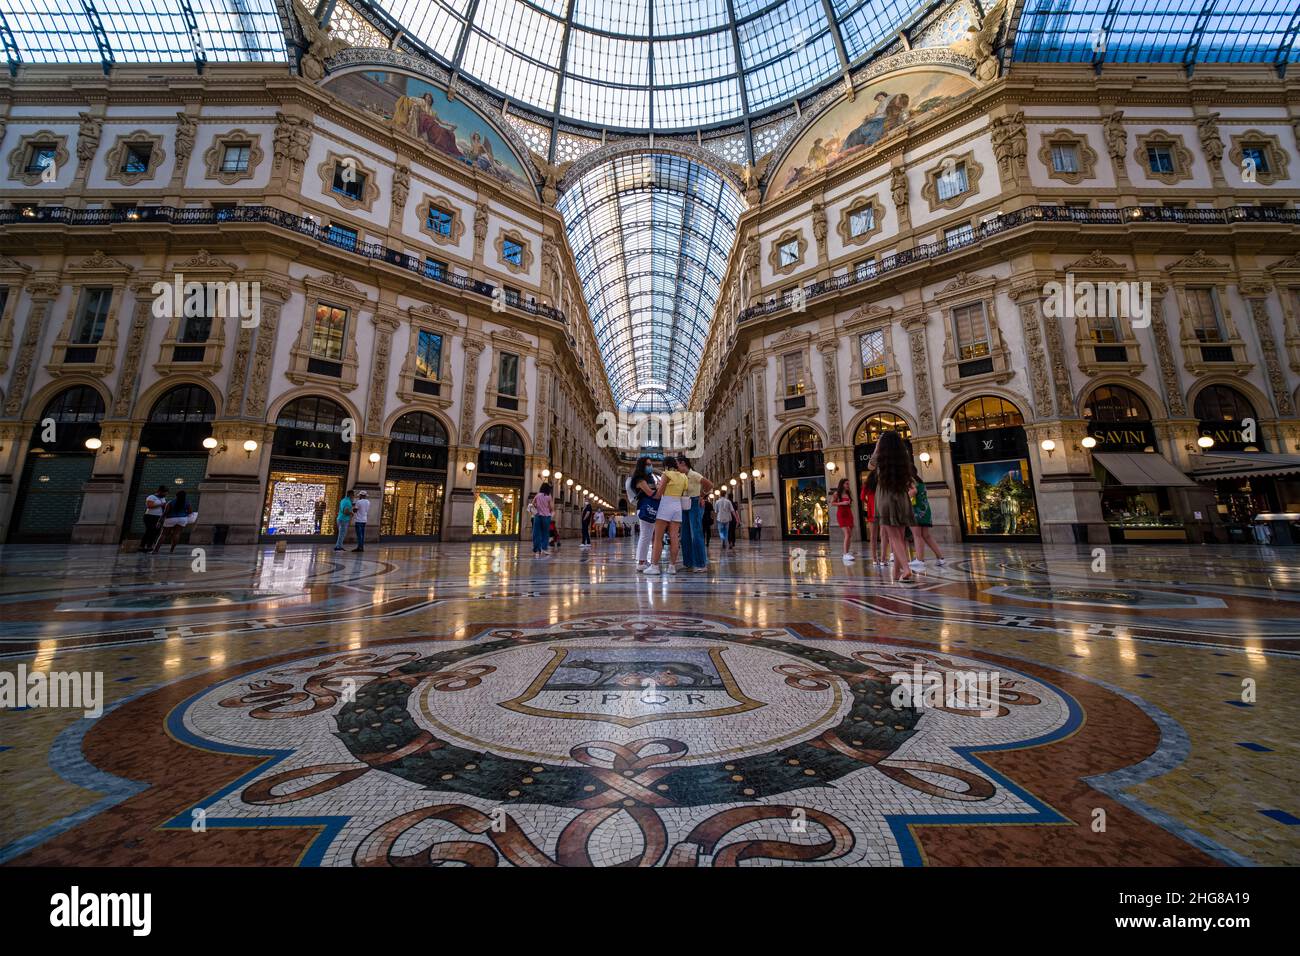 Interior panoramic view of Galleria Vittorio Emanuele II, Italy's oldest active shopping gallery. Stock Photo